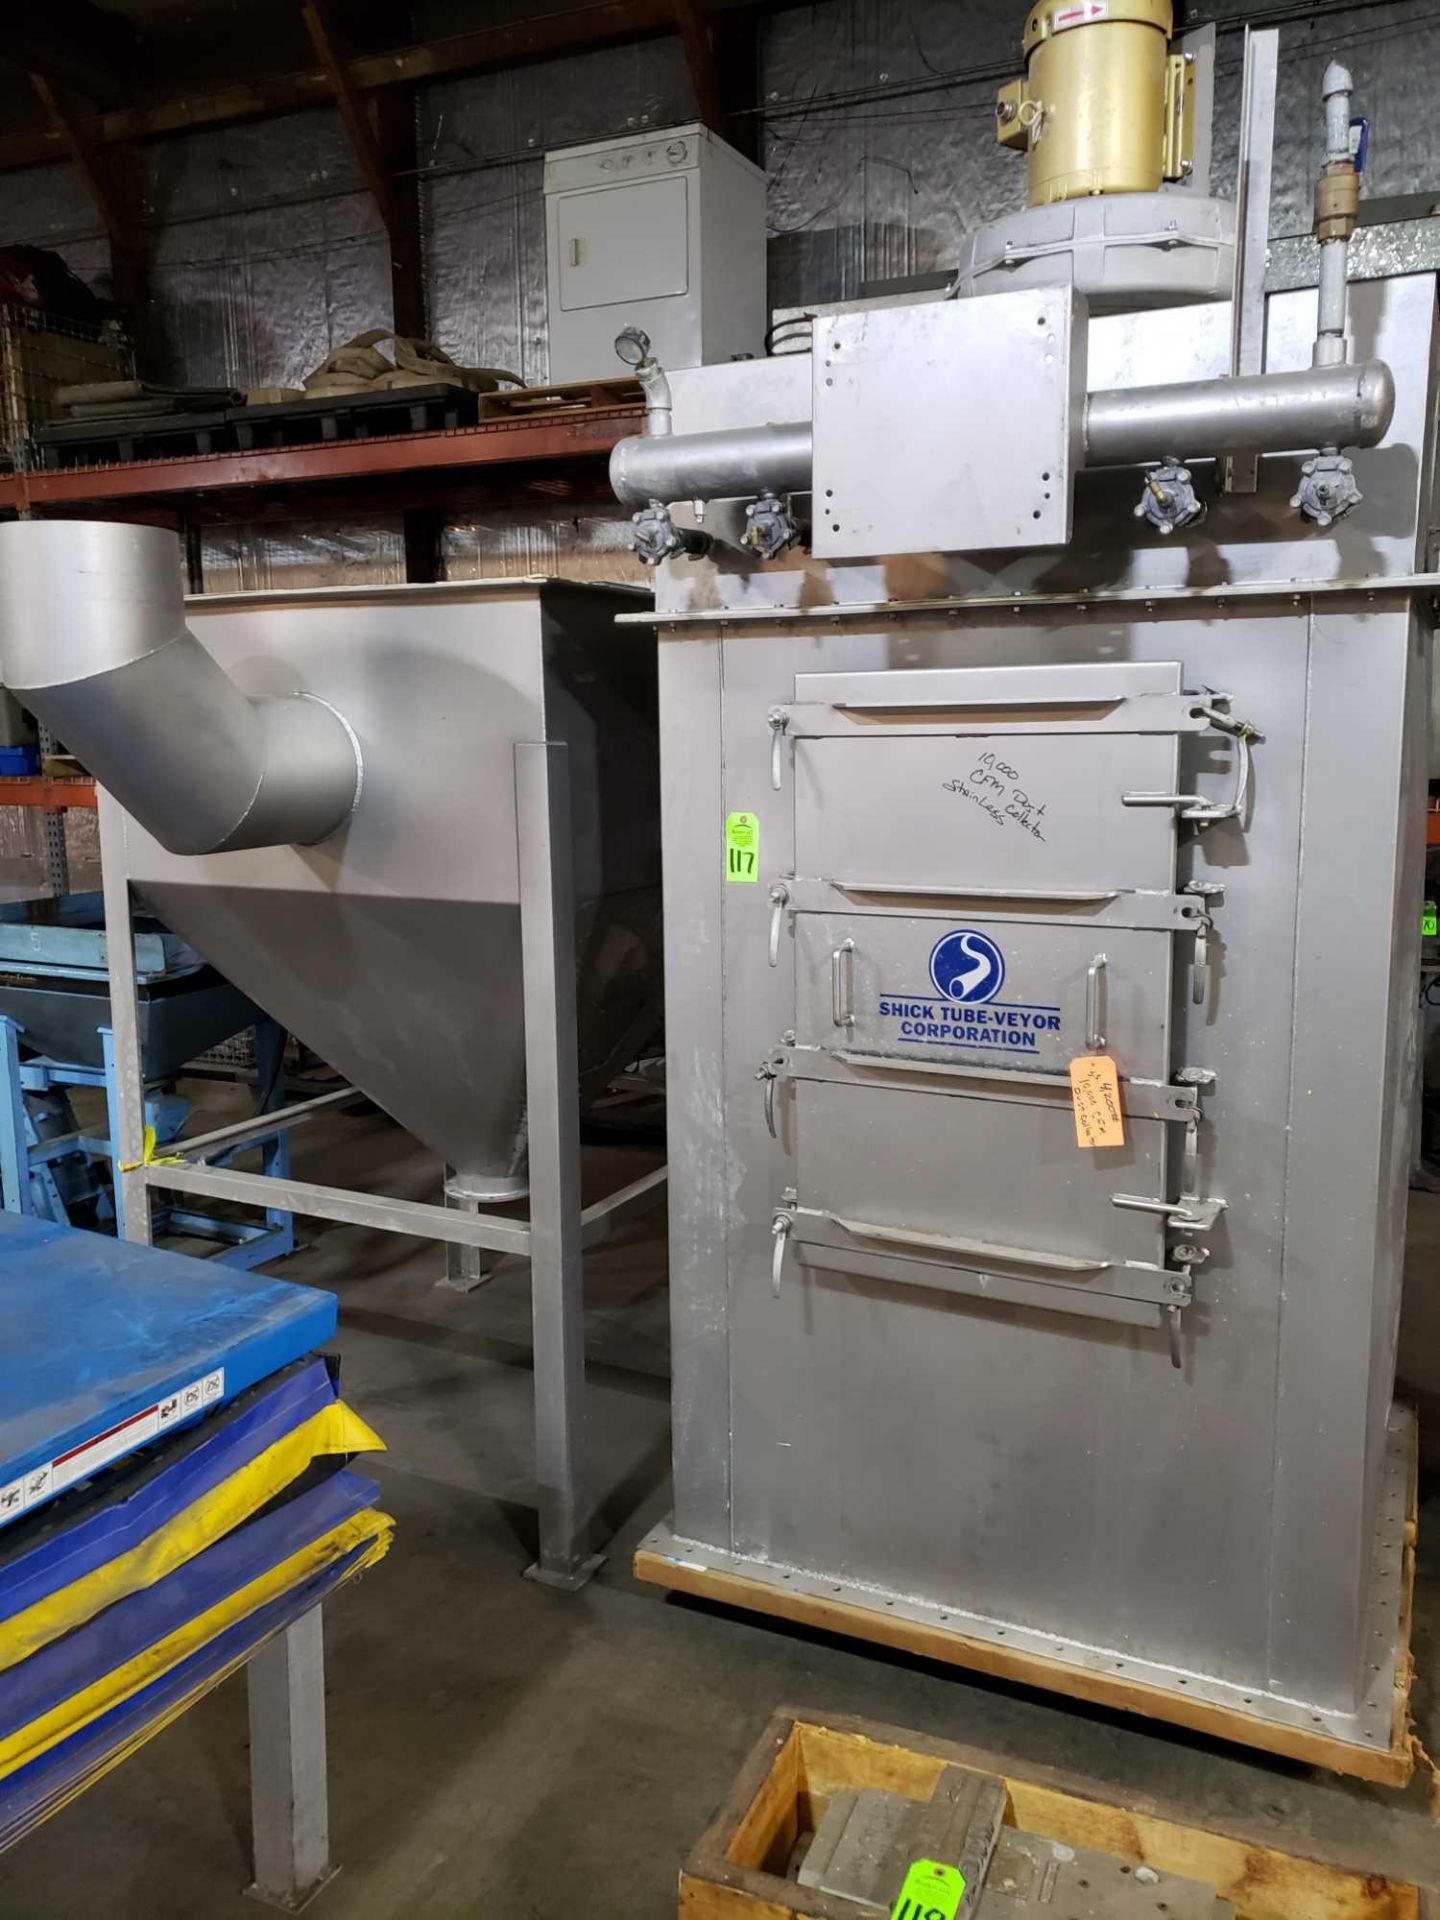 Shick Tube-Veyor Corporation 10,000cfm dust collector. Said to be all stainless steel